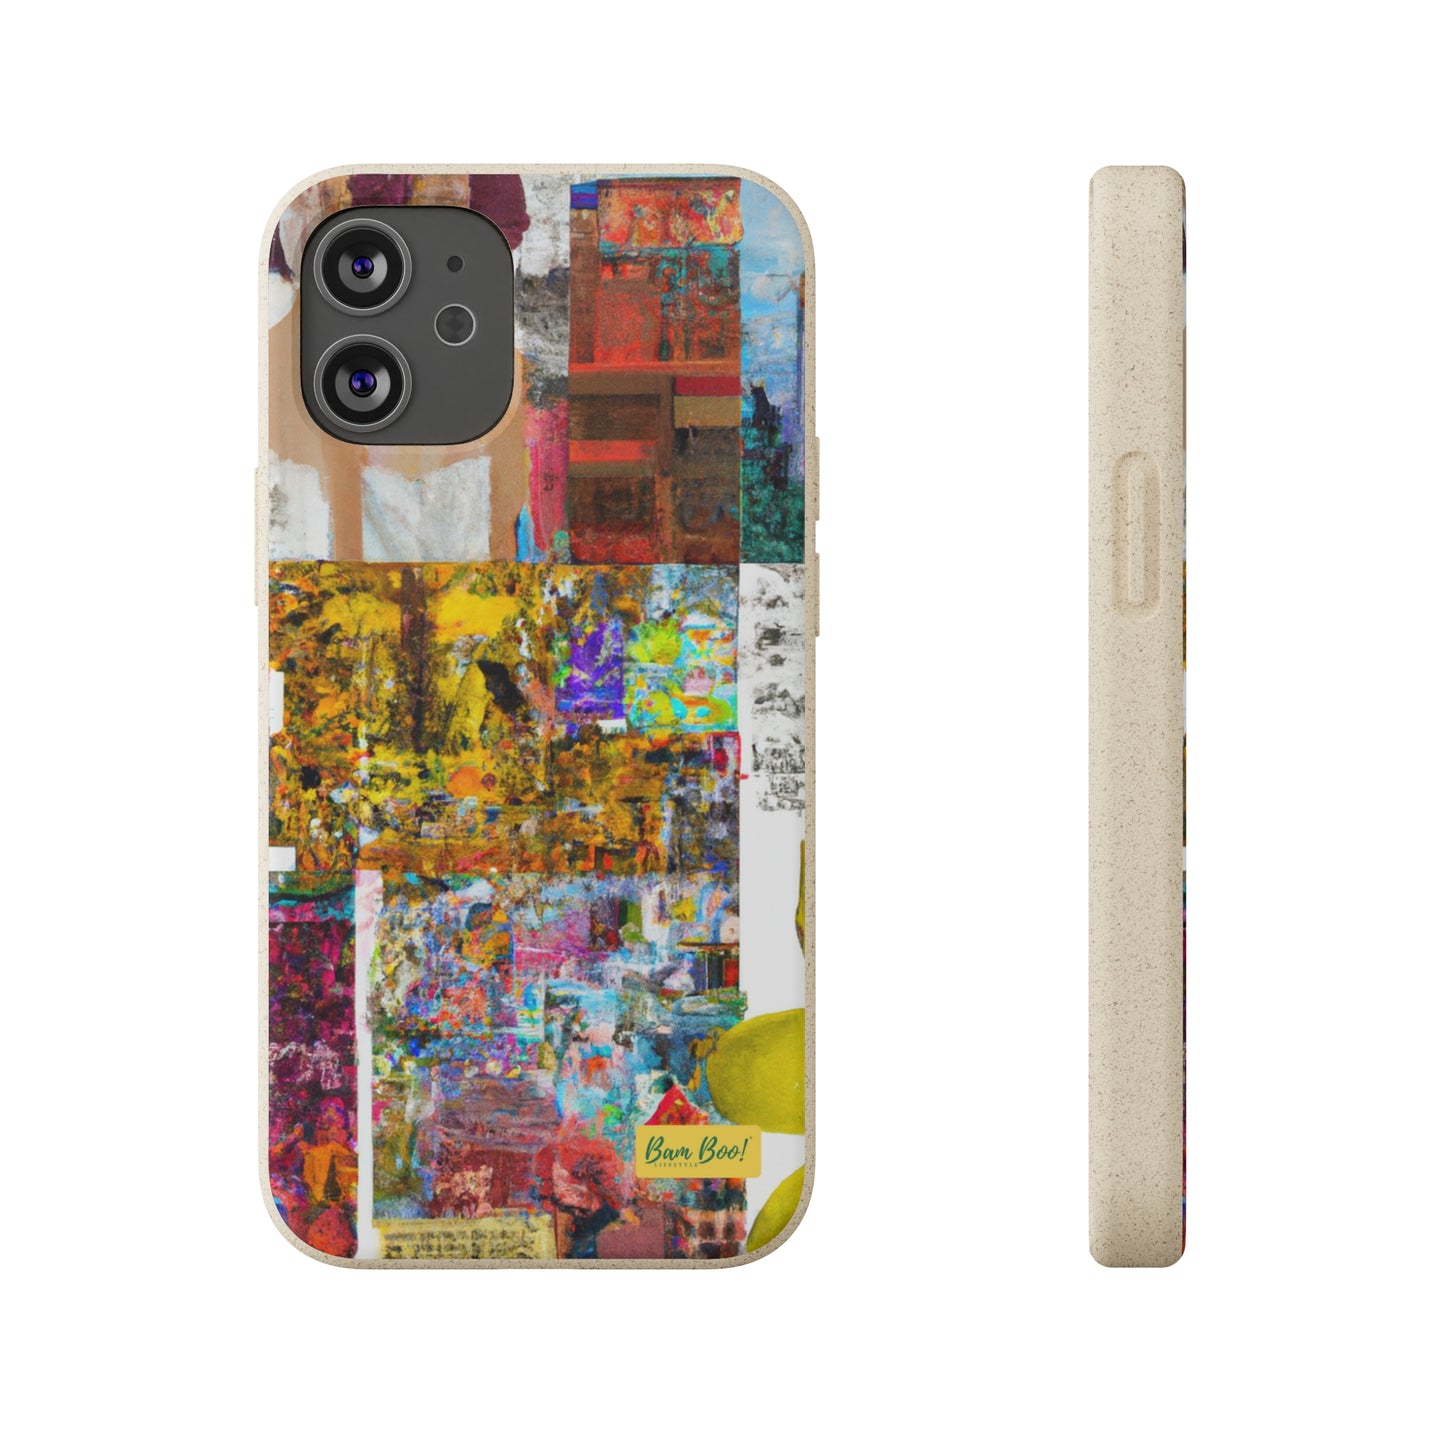 "Exploring Unity in Diversity: A Mixed Media Collage" - Bam Boo! Lifestyle Eco-friendly Cases